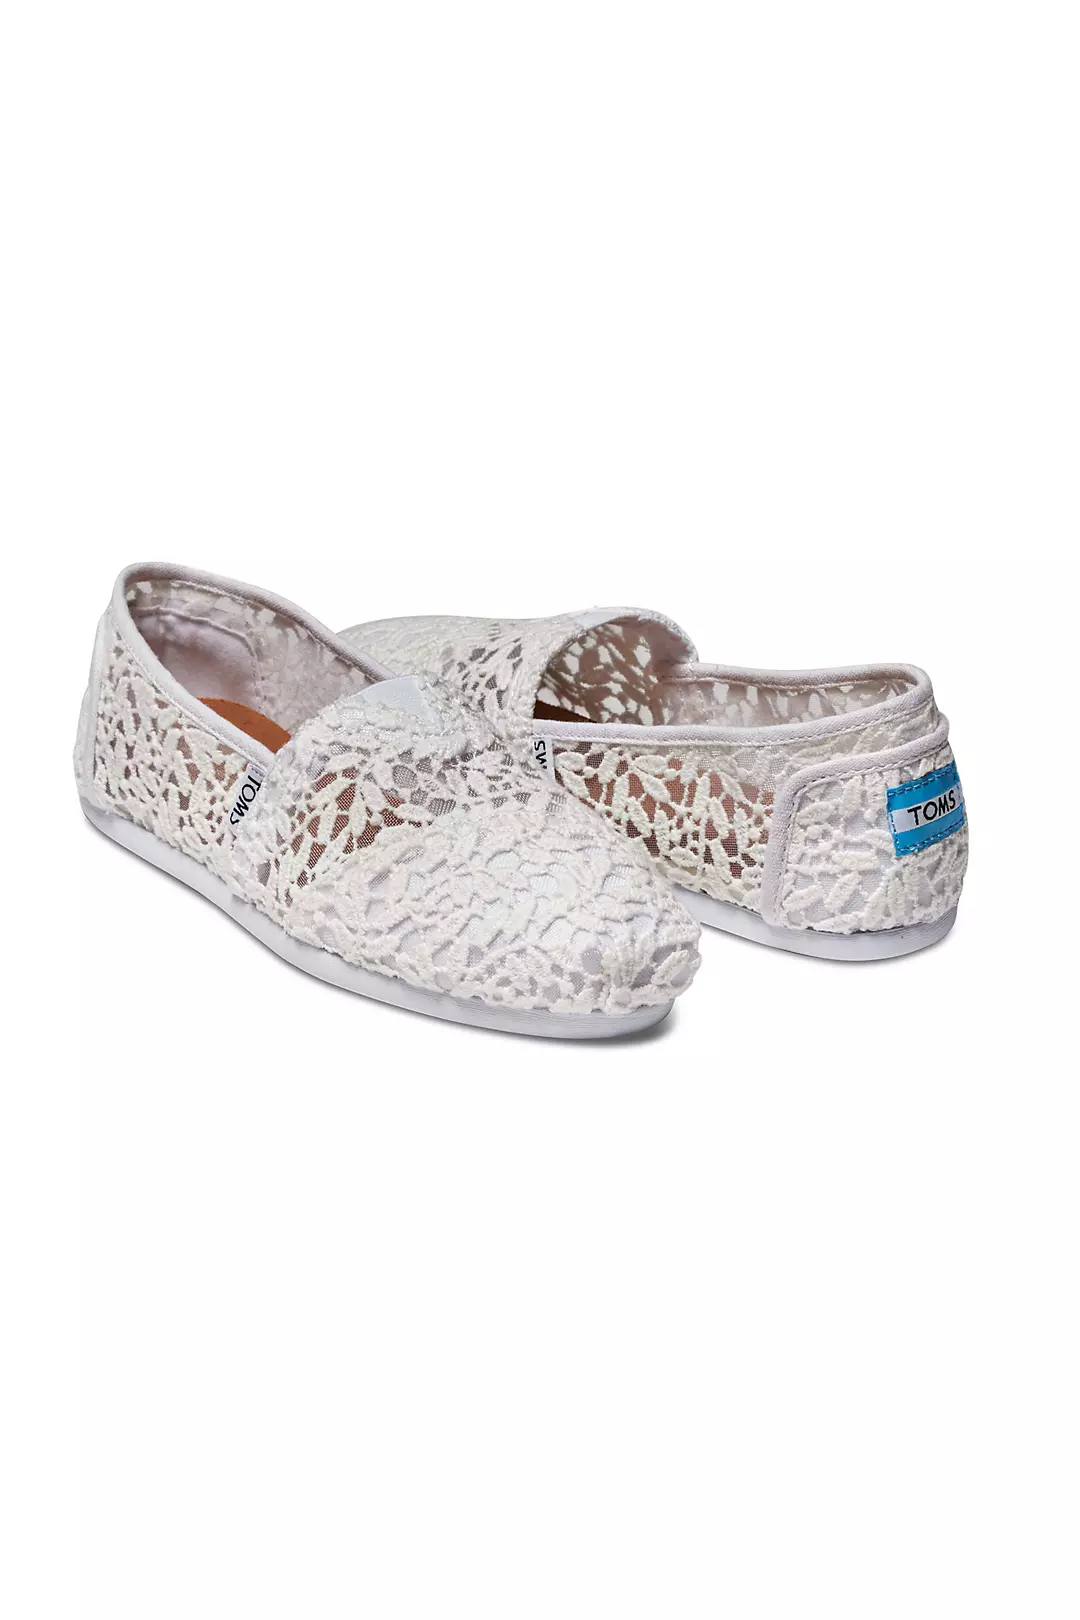 TOMS Lace Leaves Classic Slip-On Shoes Image 2